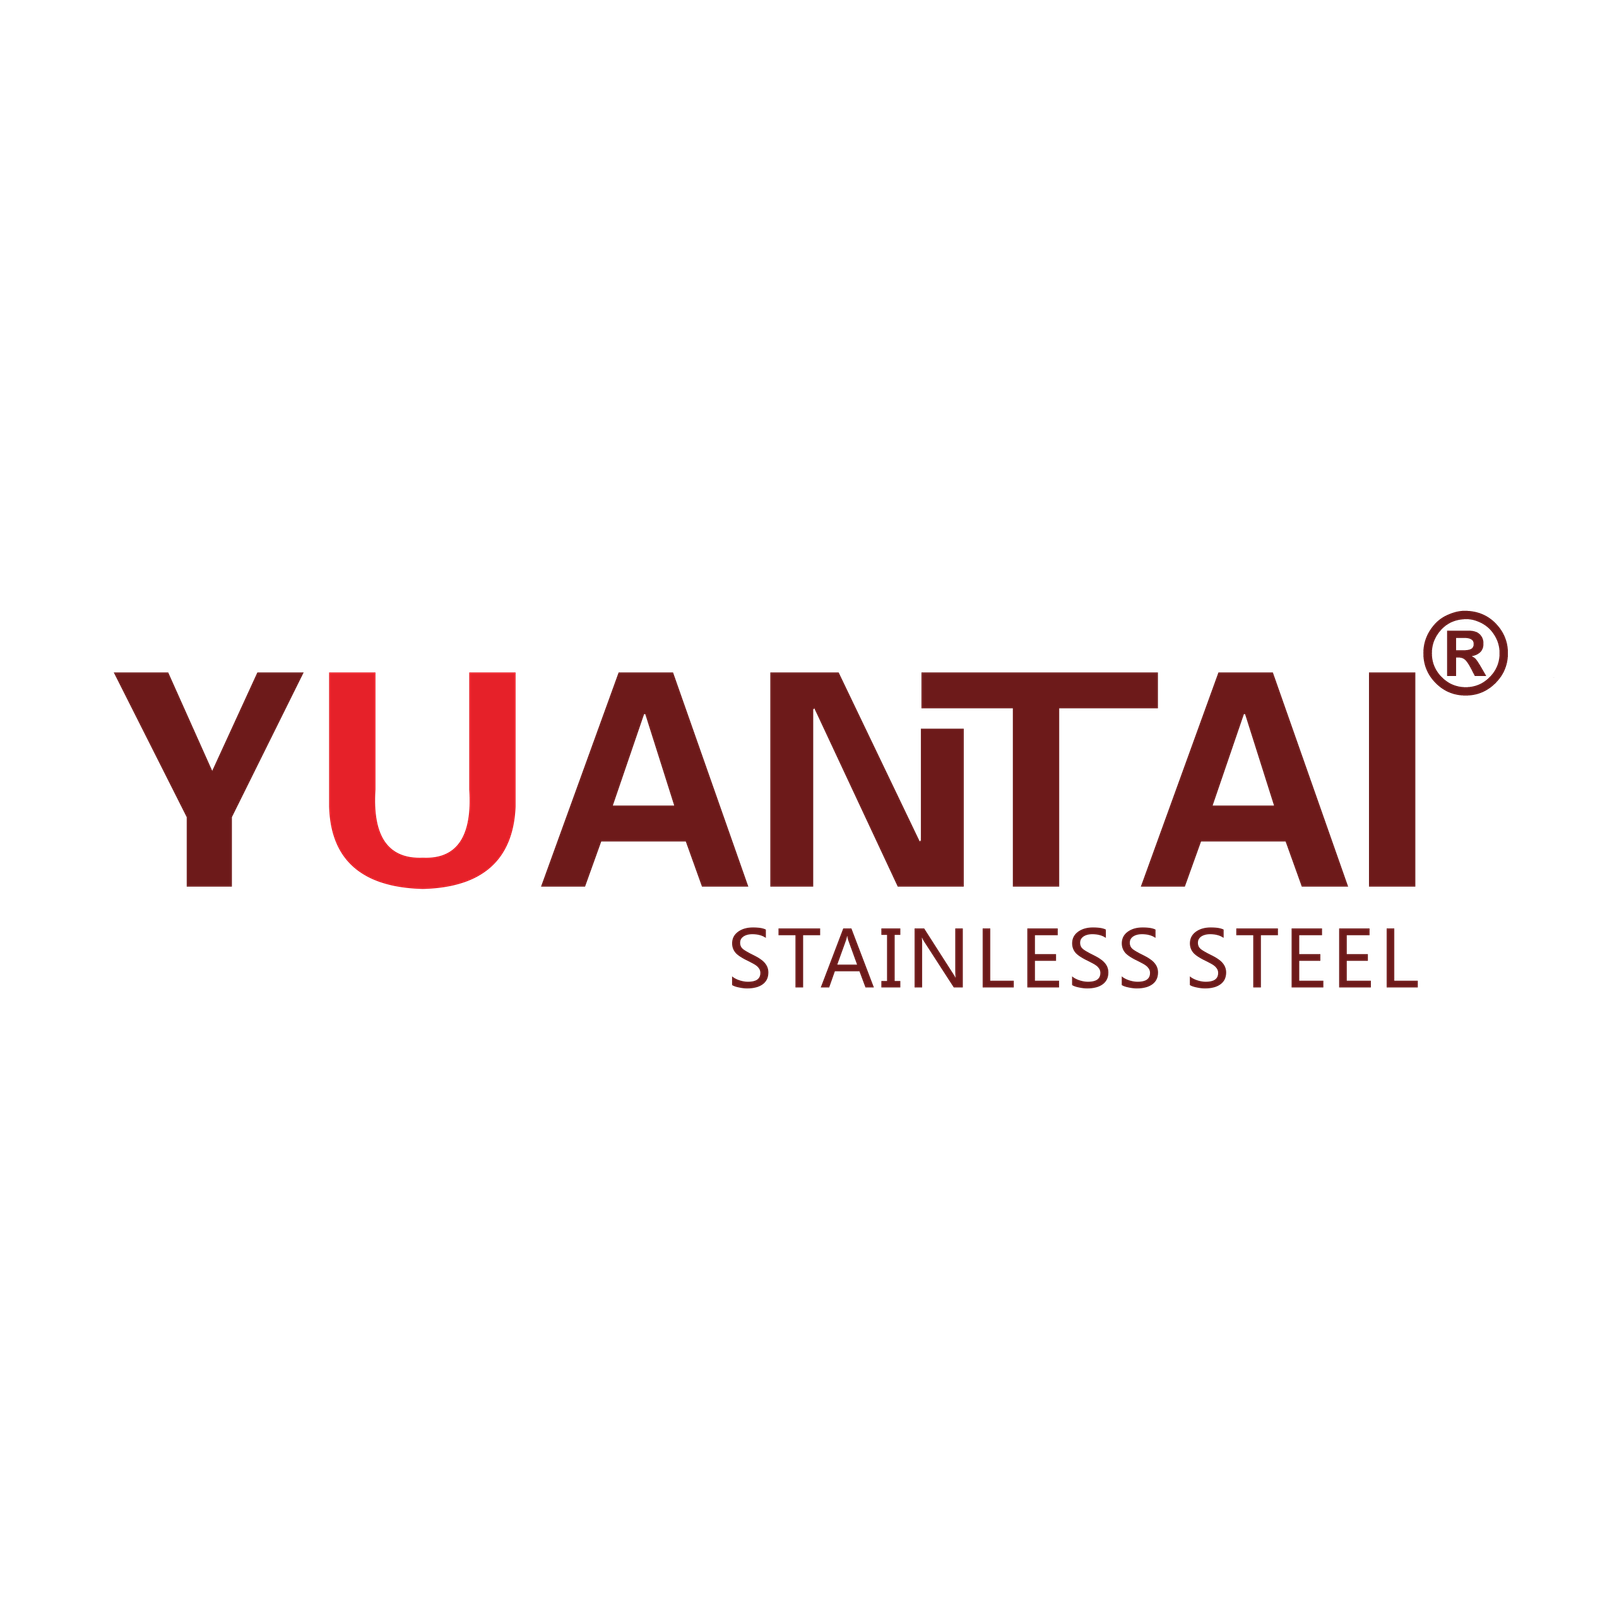 Yuantai Stainless Steel